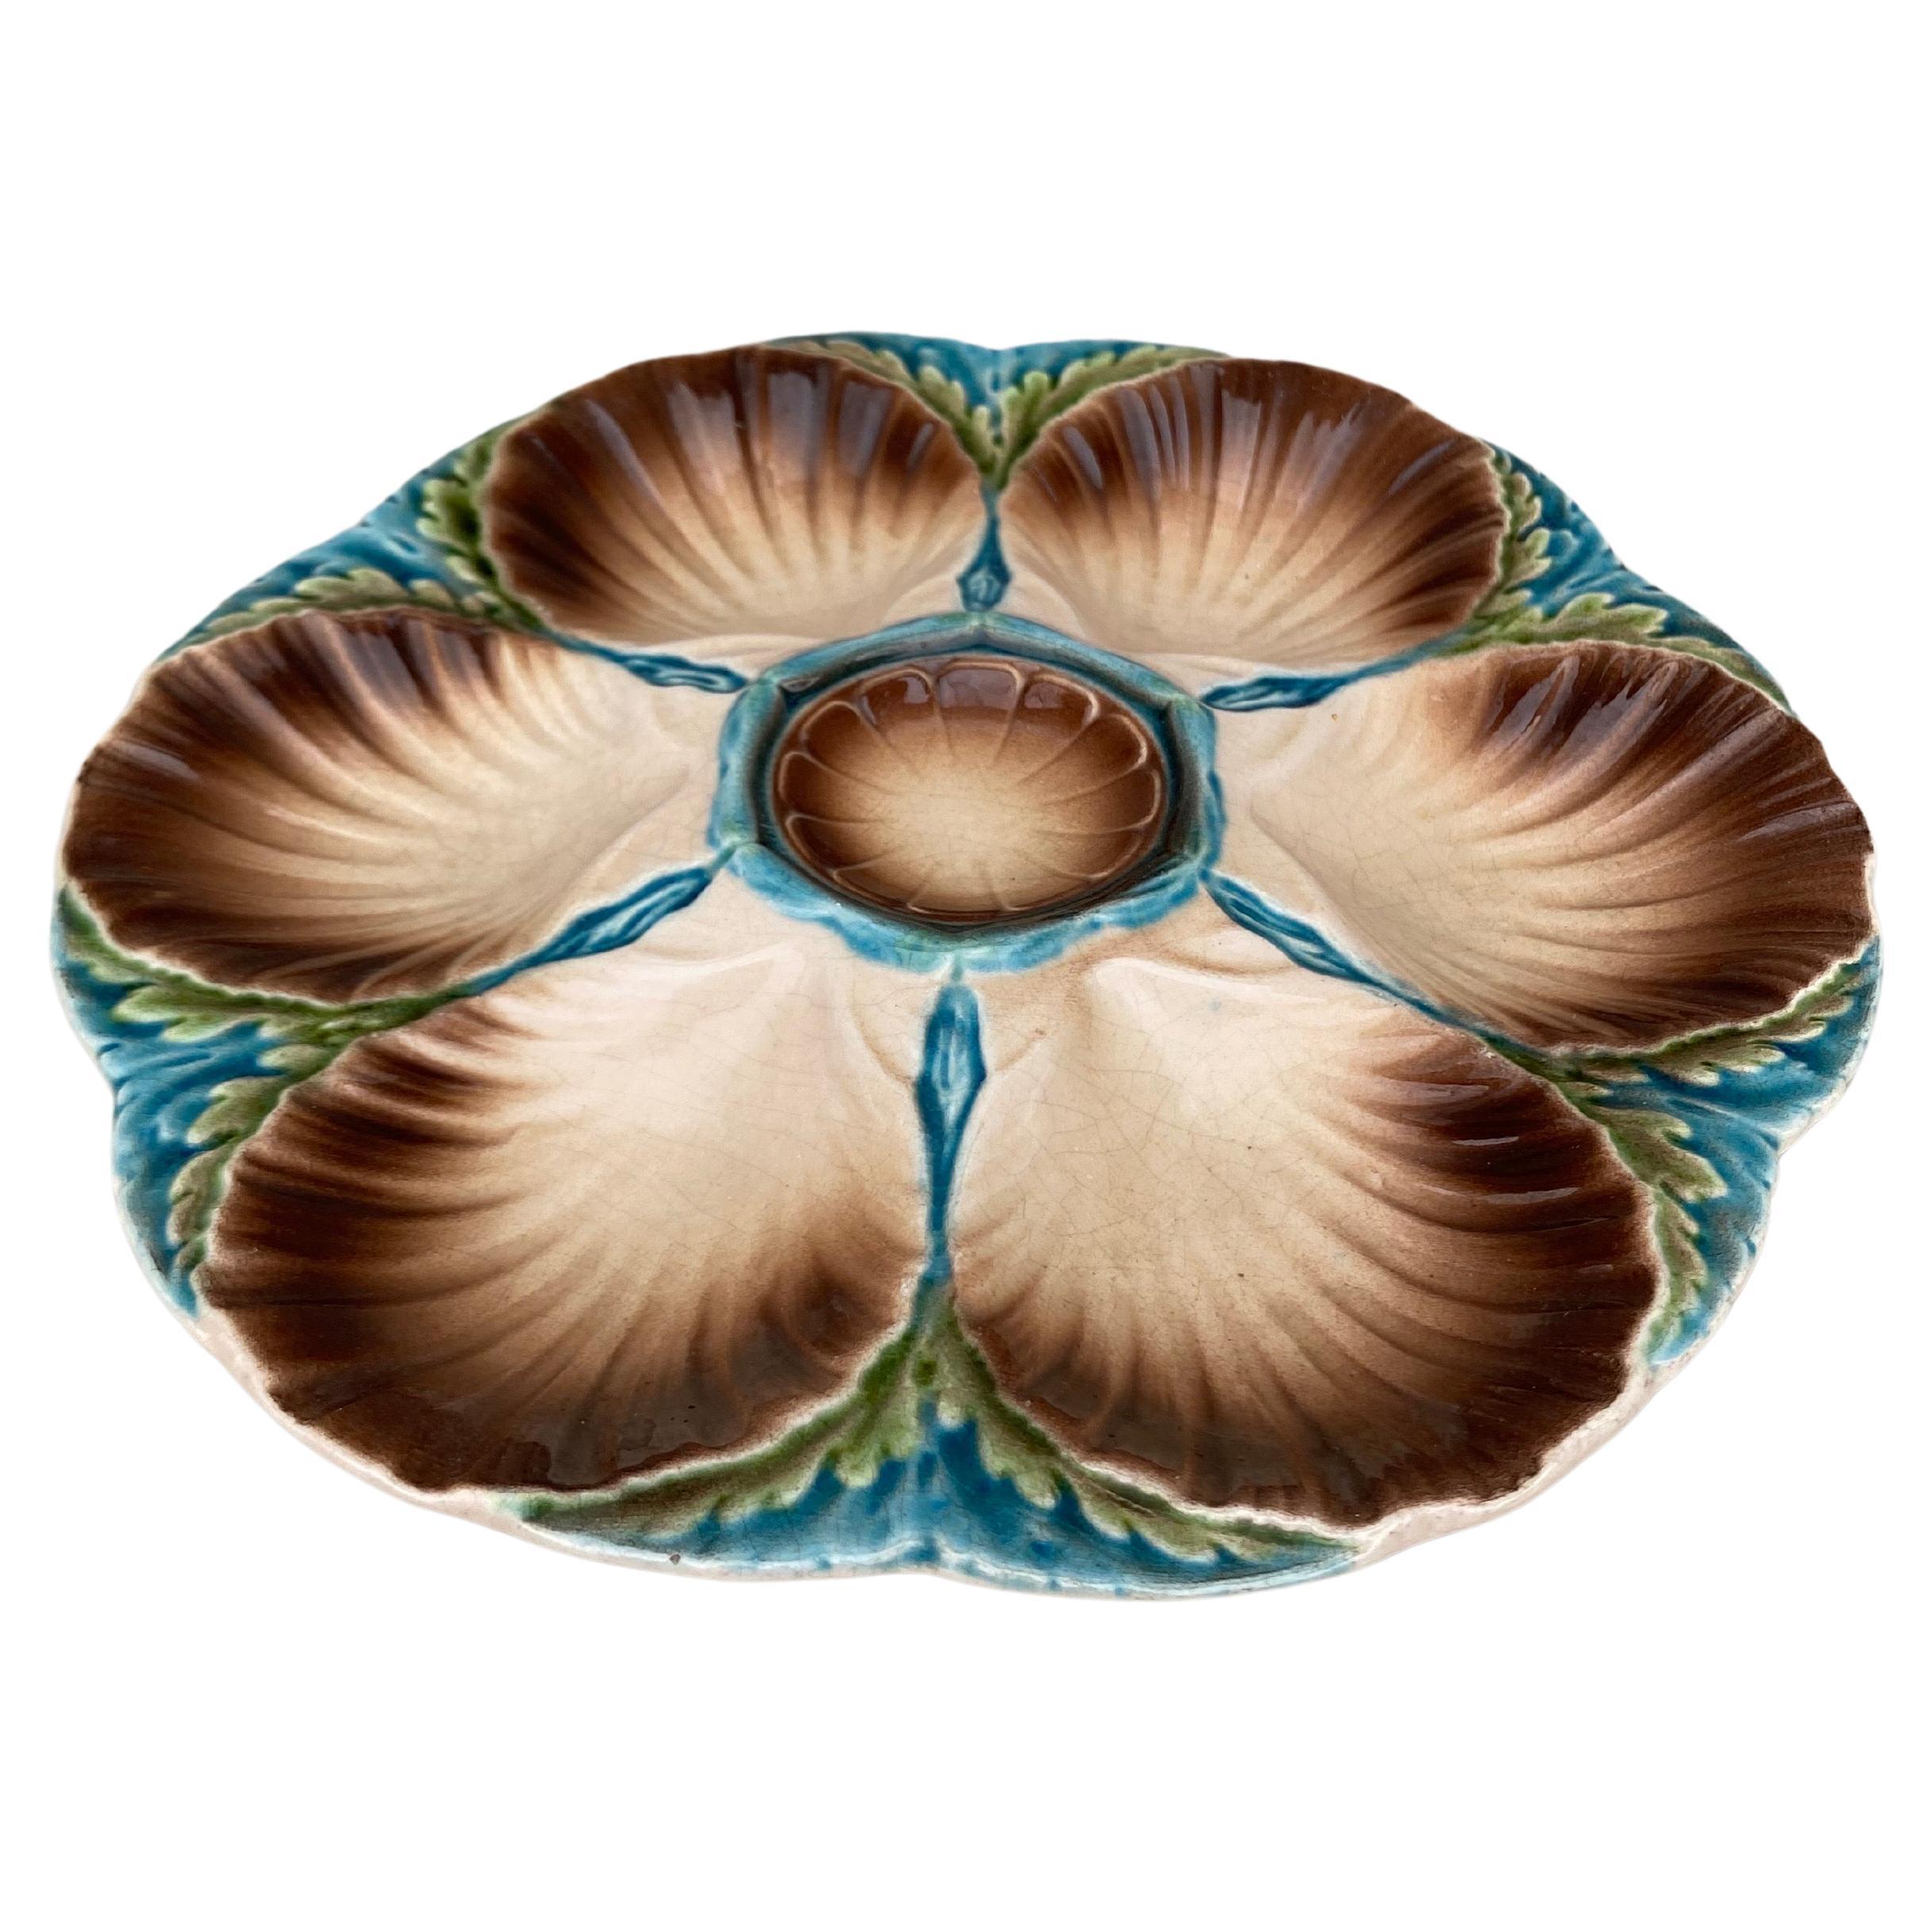 Majolica oyster plate Sarreguemines, circa 1890.
6 shells and space for the lemon on the center.